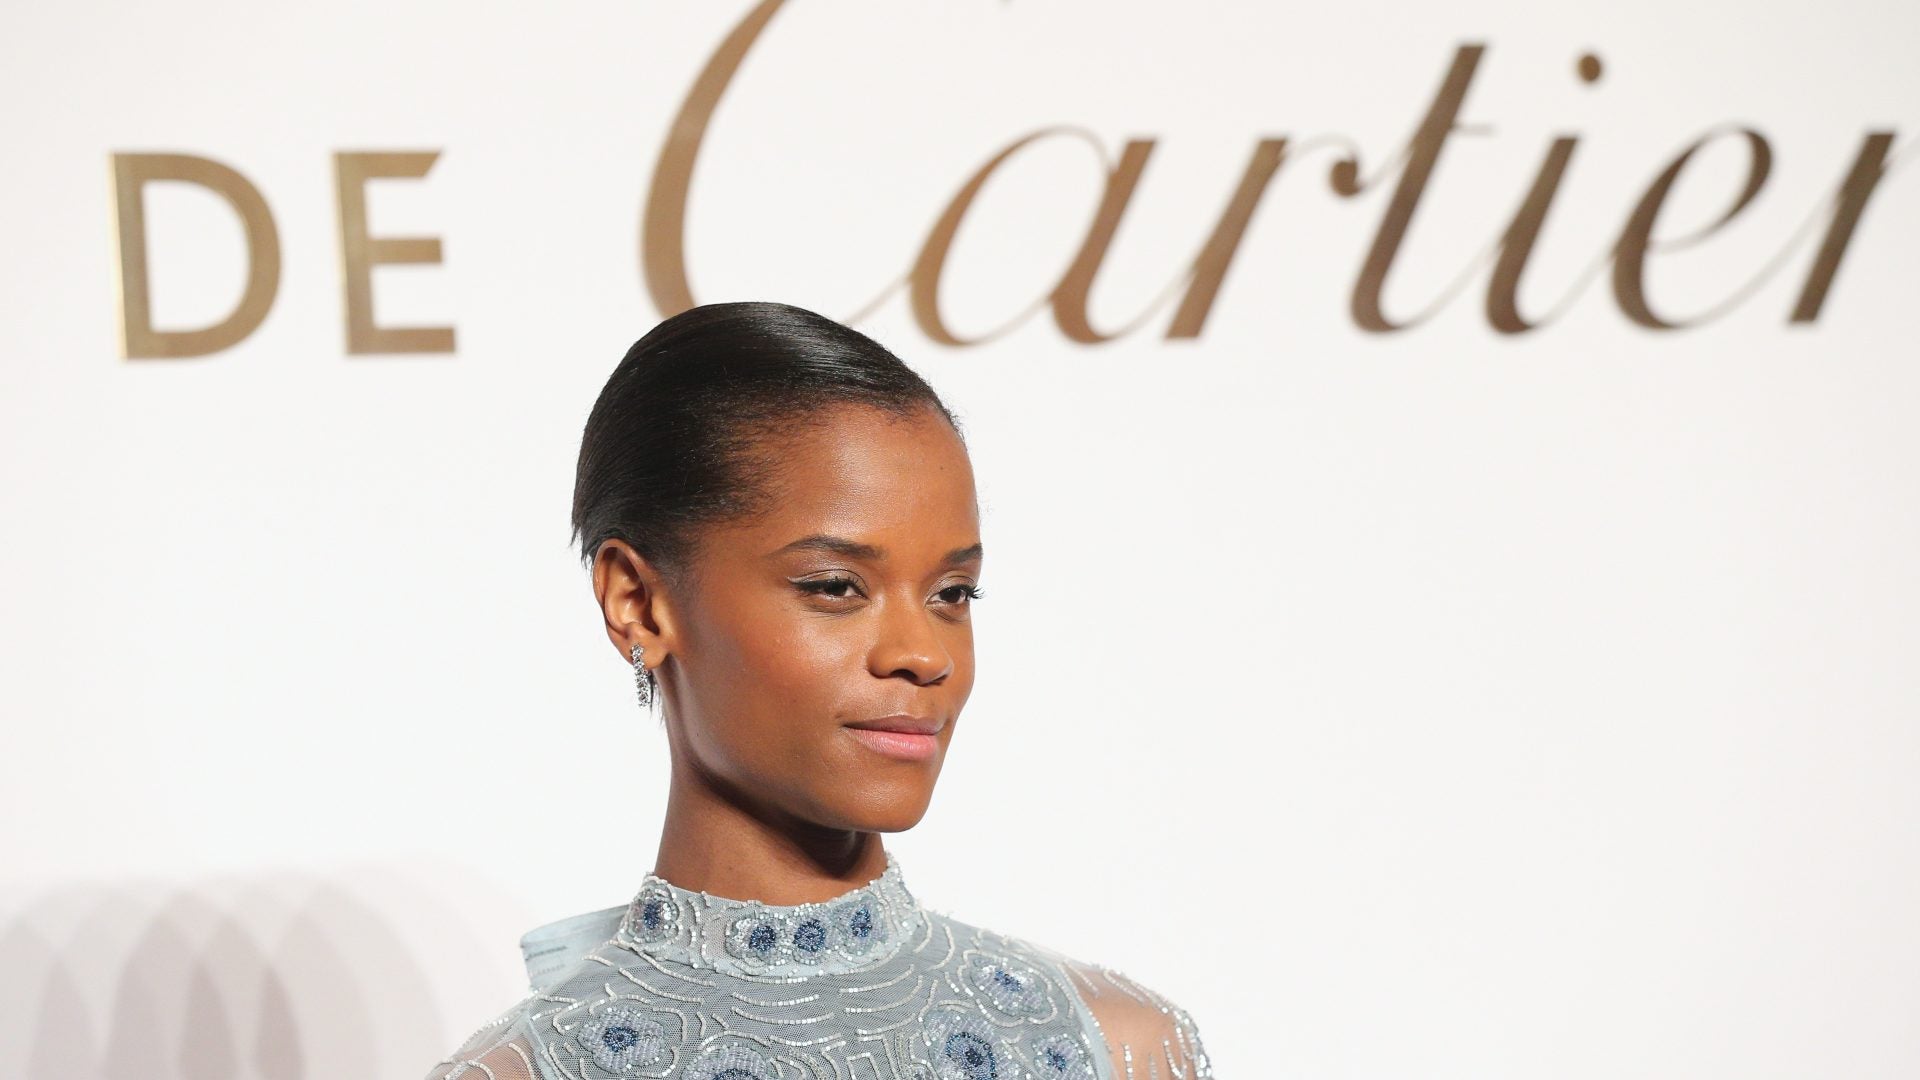 The Academy Adds Letitia Wright, Sterling K. Brown Plus Hundreds of Women And People of Color Members